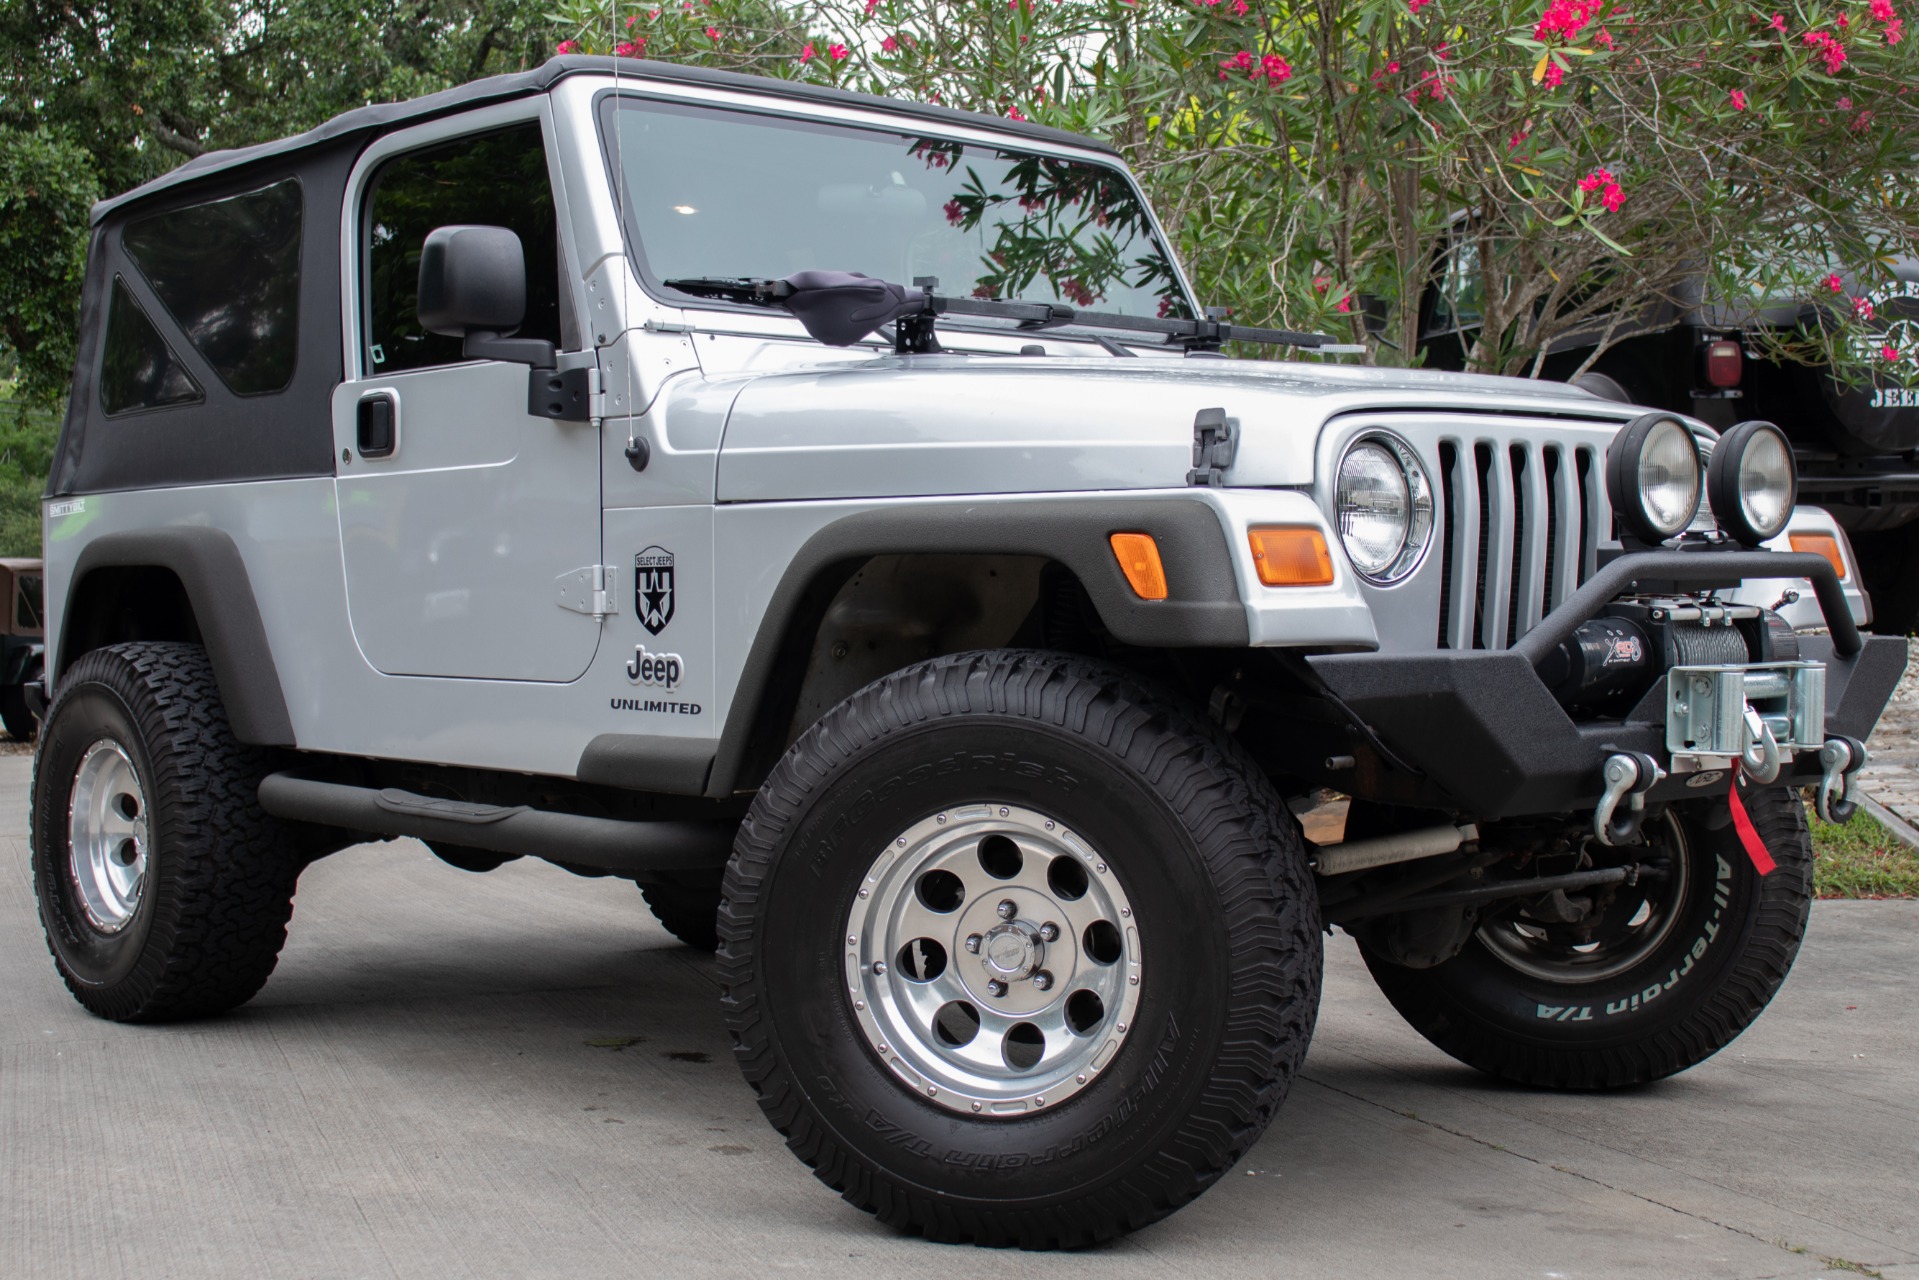 Used 2006 Jeep Wrangler Unlimited For Sale ($23,995) | Select Jeeps Inc.  Stock #771392